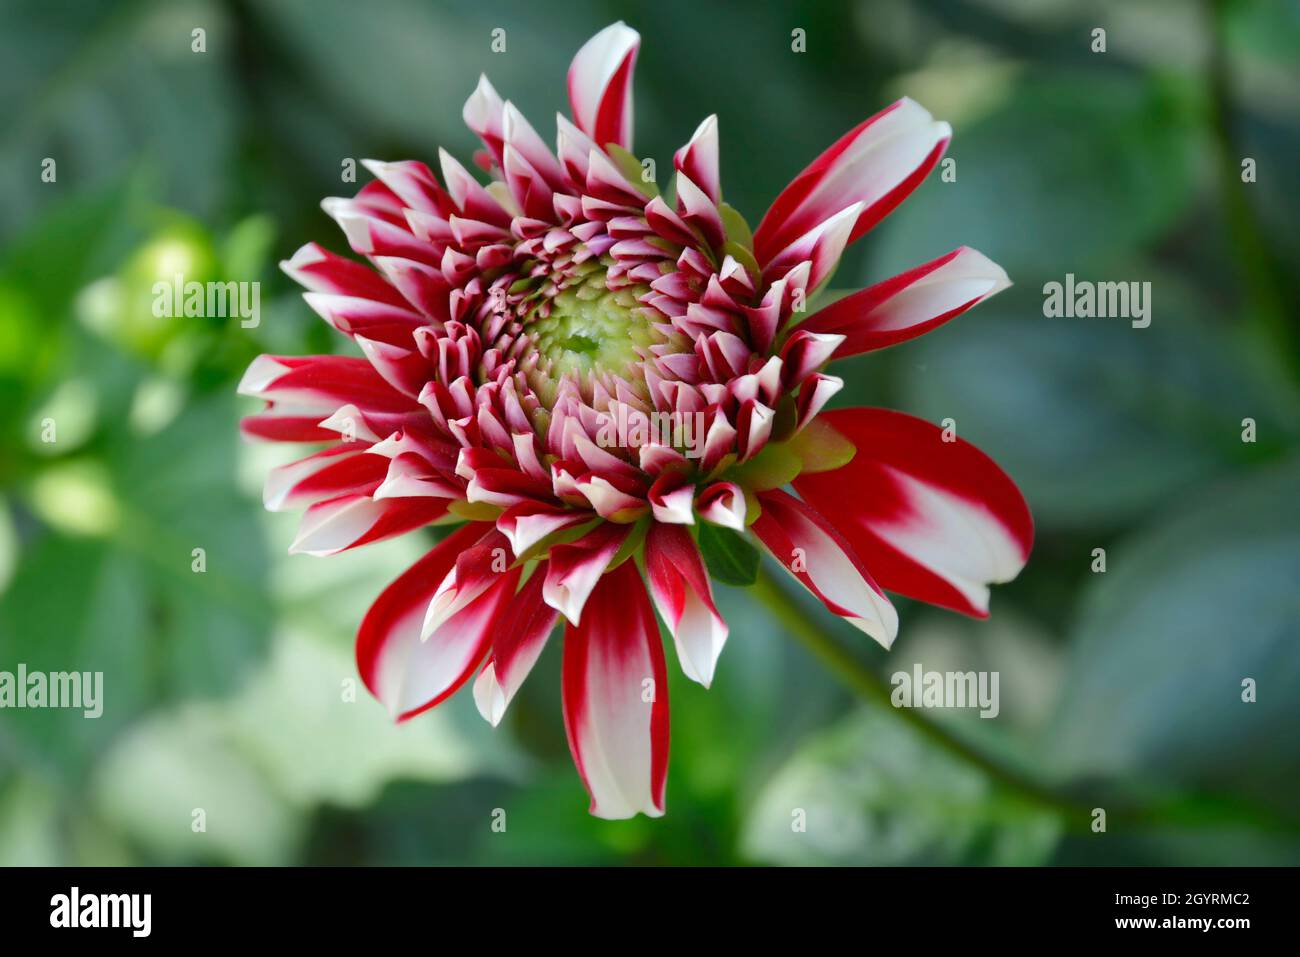 Gorgeous Shape and color of Dahlia Flower in beautiful background Stock Photo